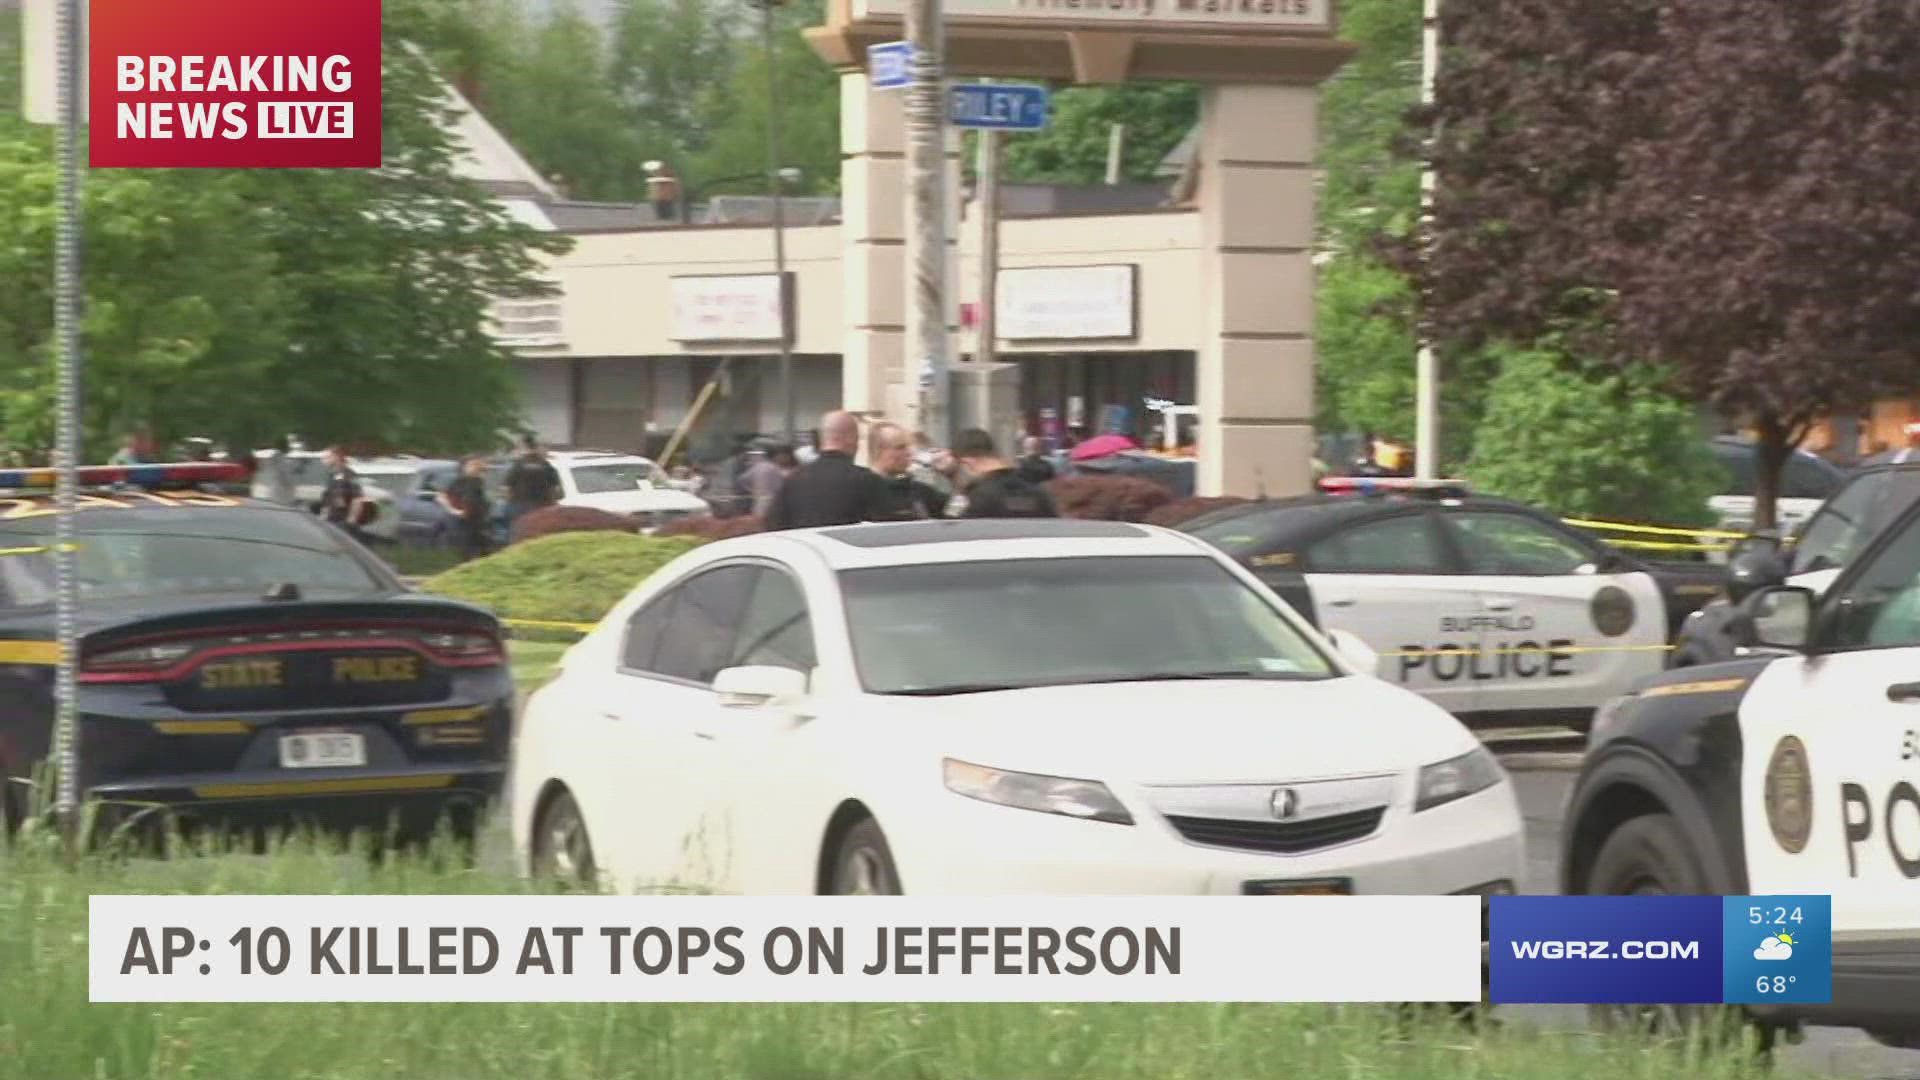 The Buffalo Police Department has confirmed a mass shooting at Tops Market on Jefferson Avenue Saturday afternoon around 3, killing at least 10 people.